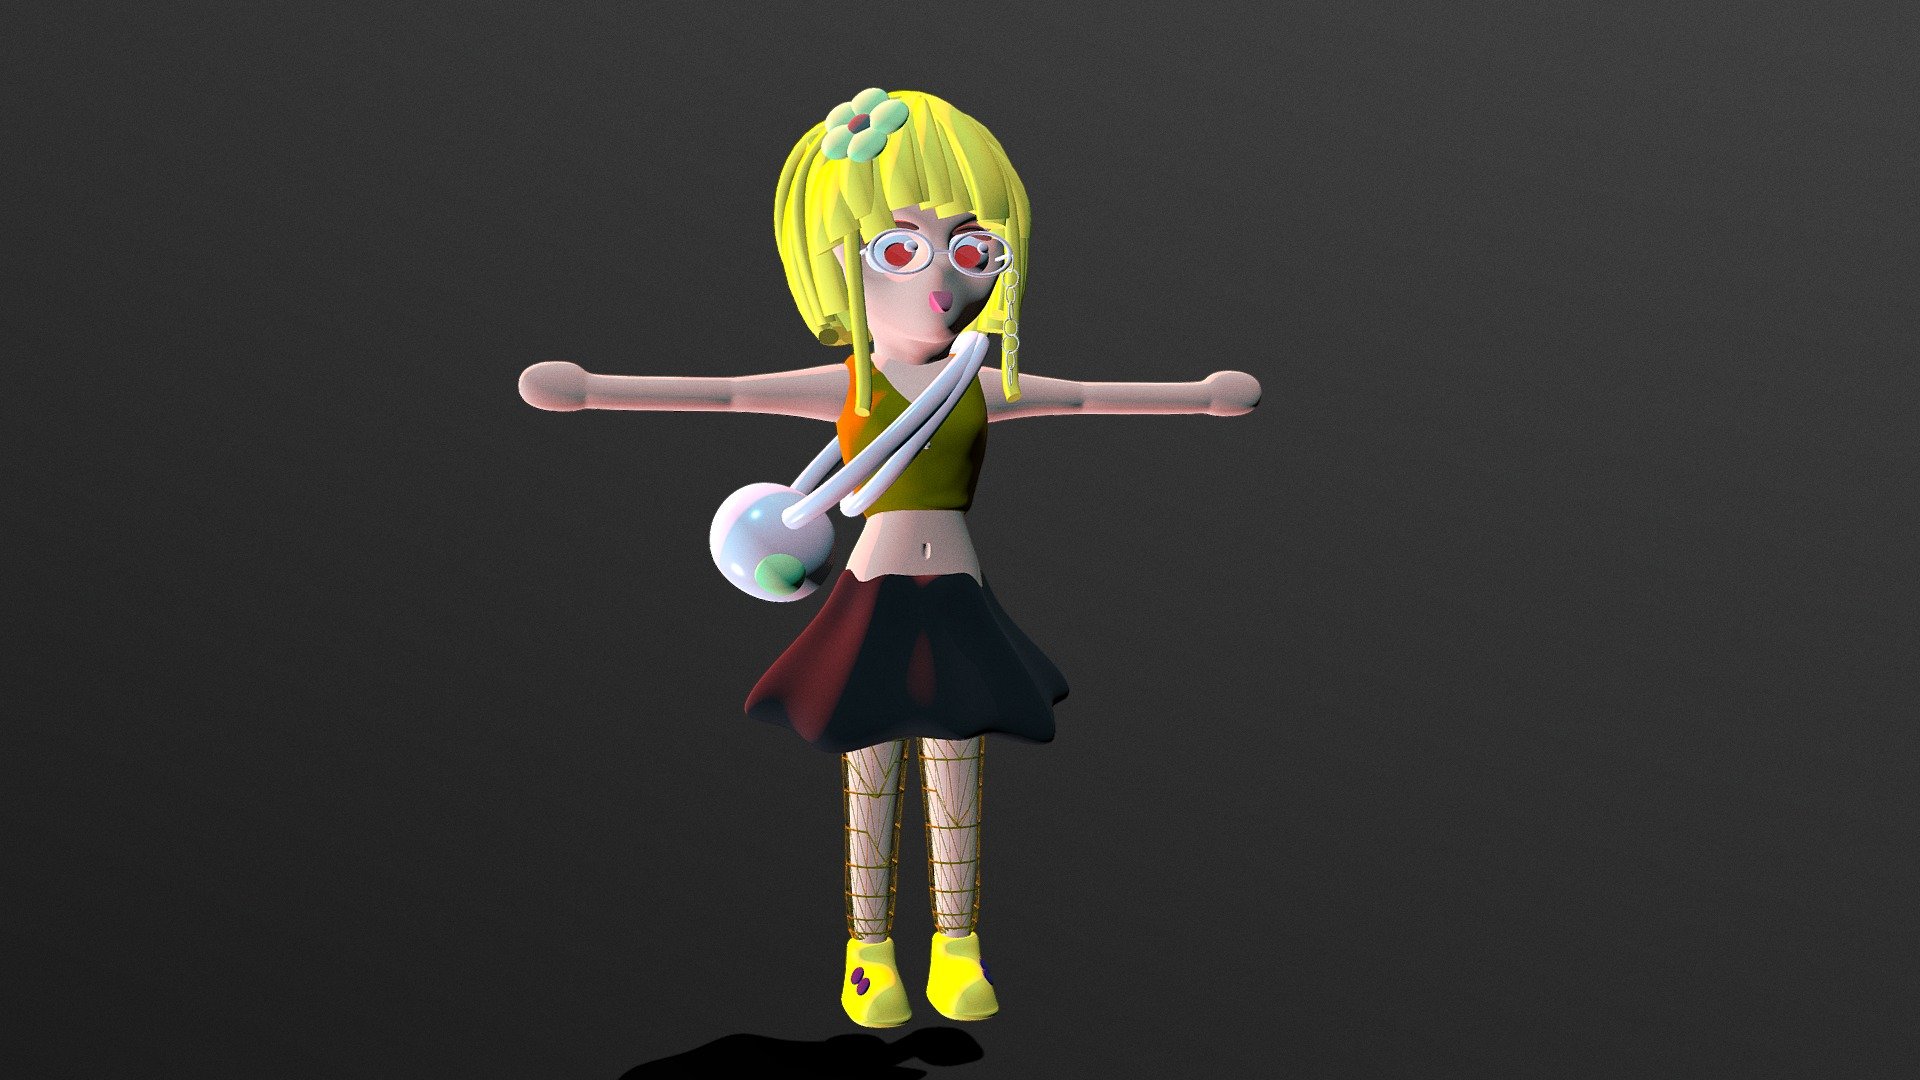 1st model on sketchfab. u are welcome!
subscribe my instagram: @dig1tax - Anime Cartoon Girl - Download Free 3D model by digitax 3d model